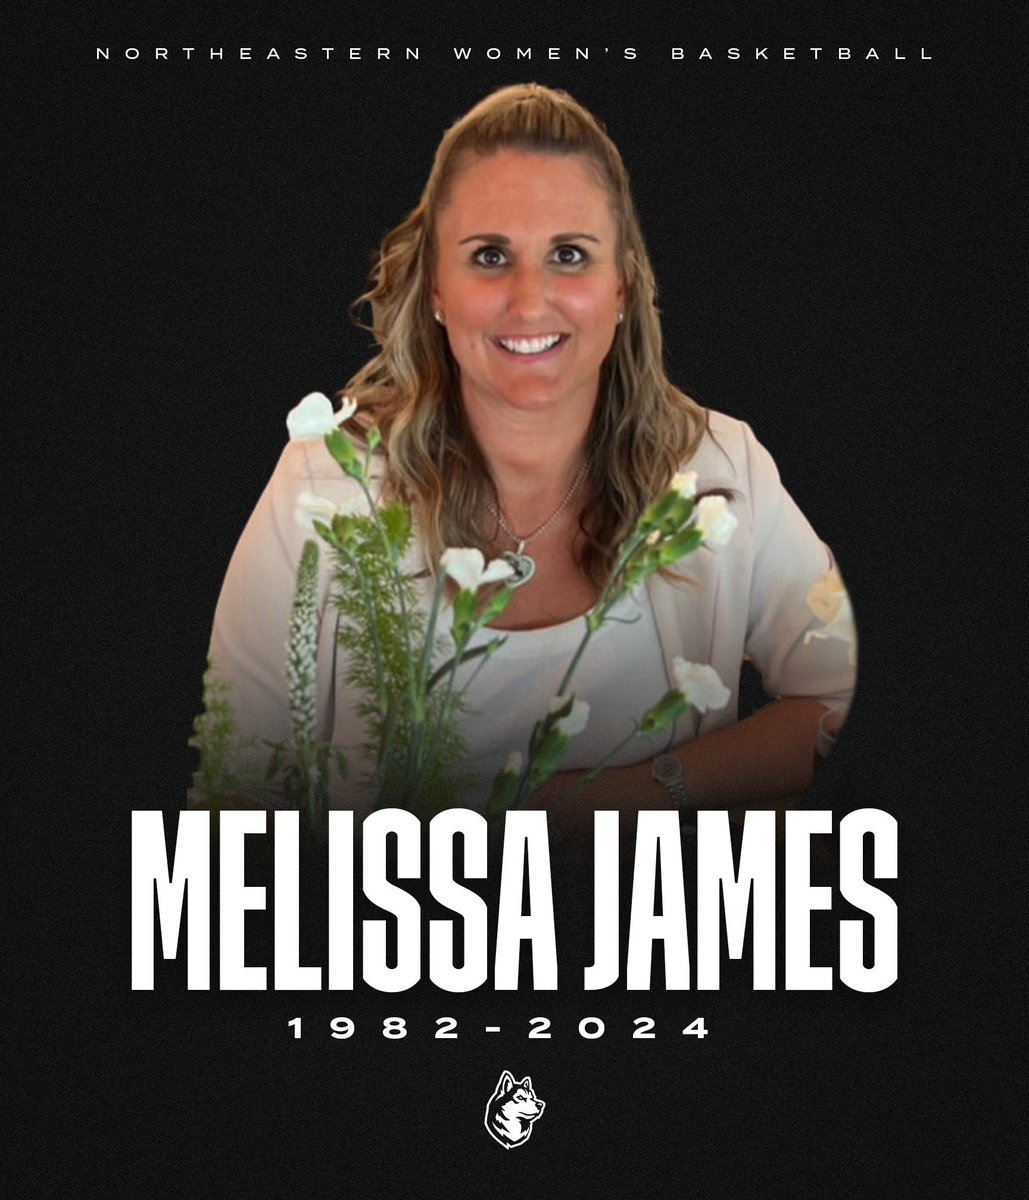 The Northeastern family extends its most heartfelt condolences to the family/friends of alum Melissa James (Kowalski). Kowalski played with the Huskies from 2000-04, and broke the program 3-point field goal record with her career 245 threes, holding that record for over a decade.